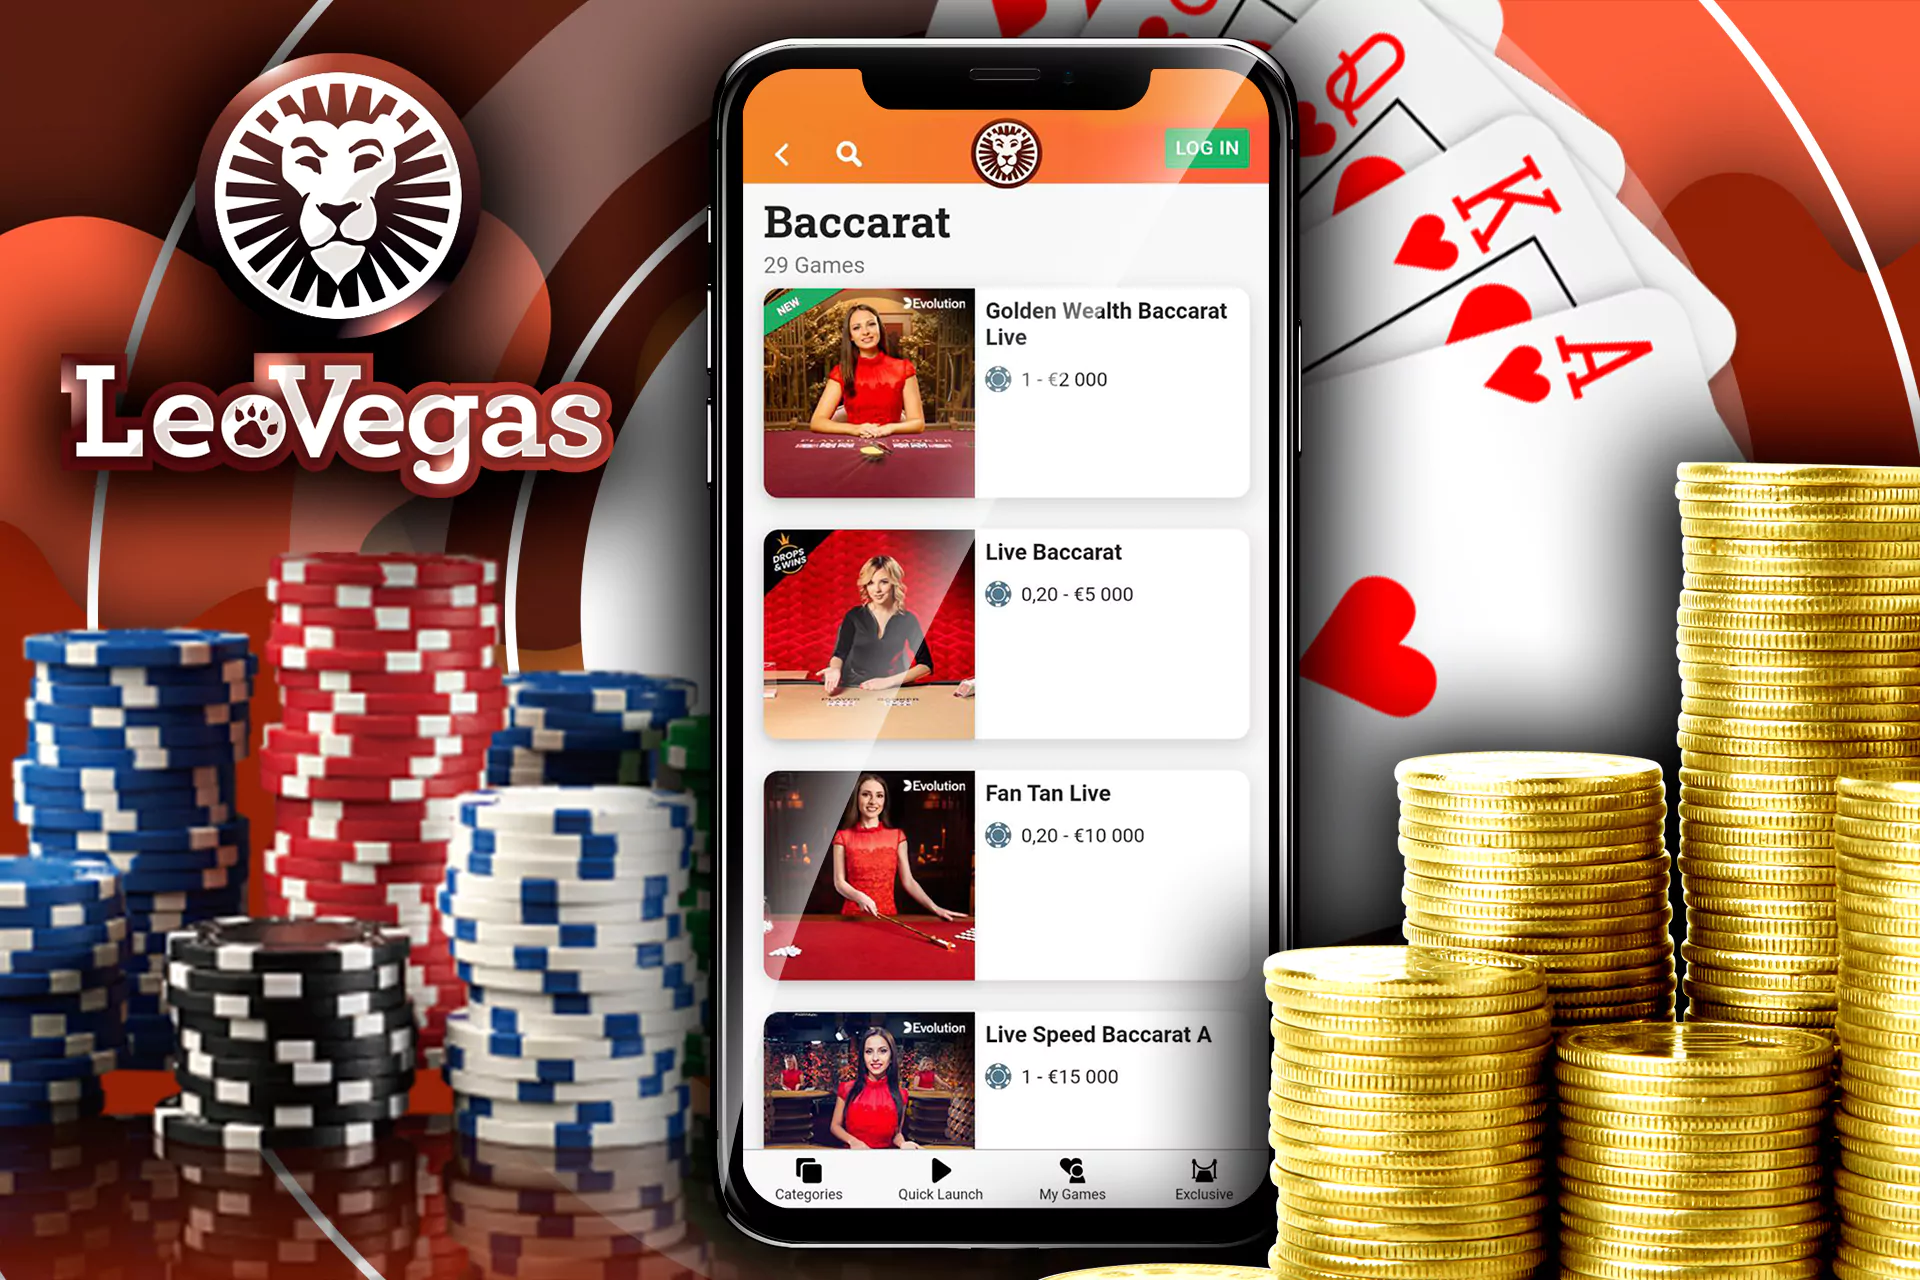 Try this exciting game in the LeoVegas online casino.